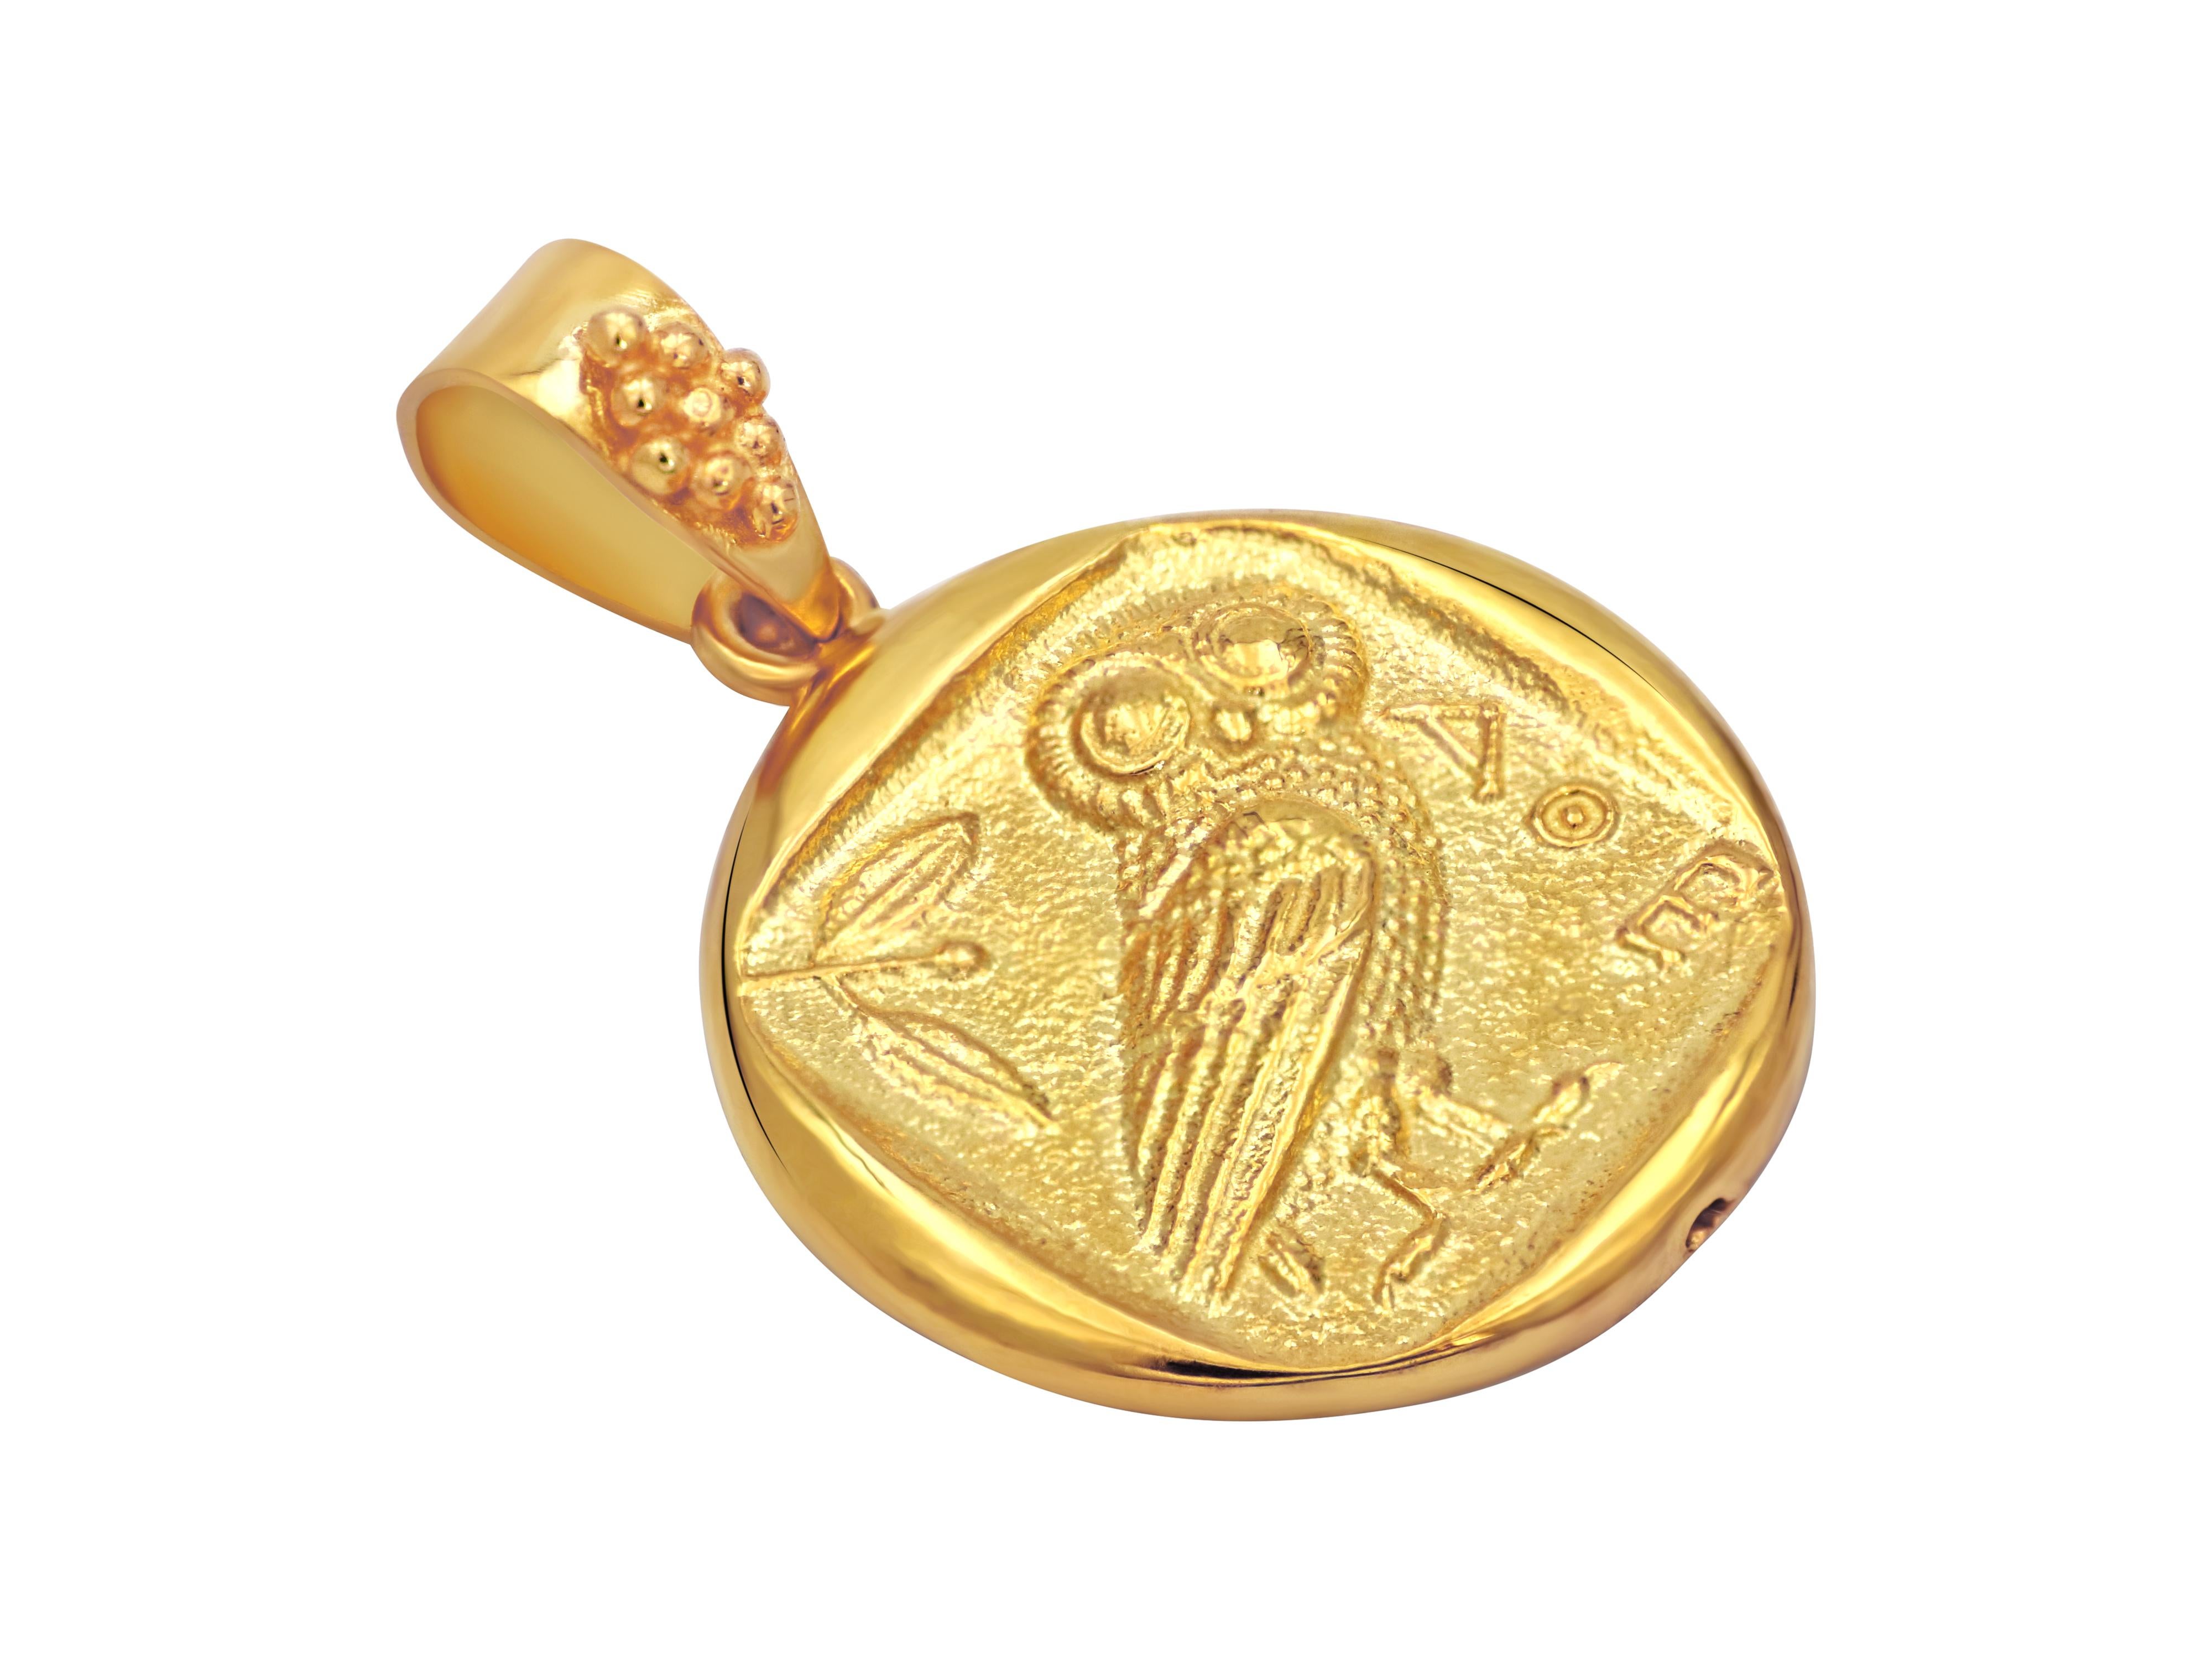 Ancient Greek coin replica from 440 BC set in 18 karat yellow gold. The owl was the symbol of Athens and wisdom and the favorite bird of Goddess Athena in which she was transformed very often.